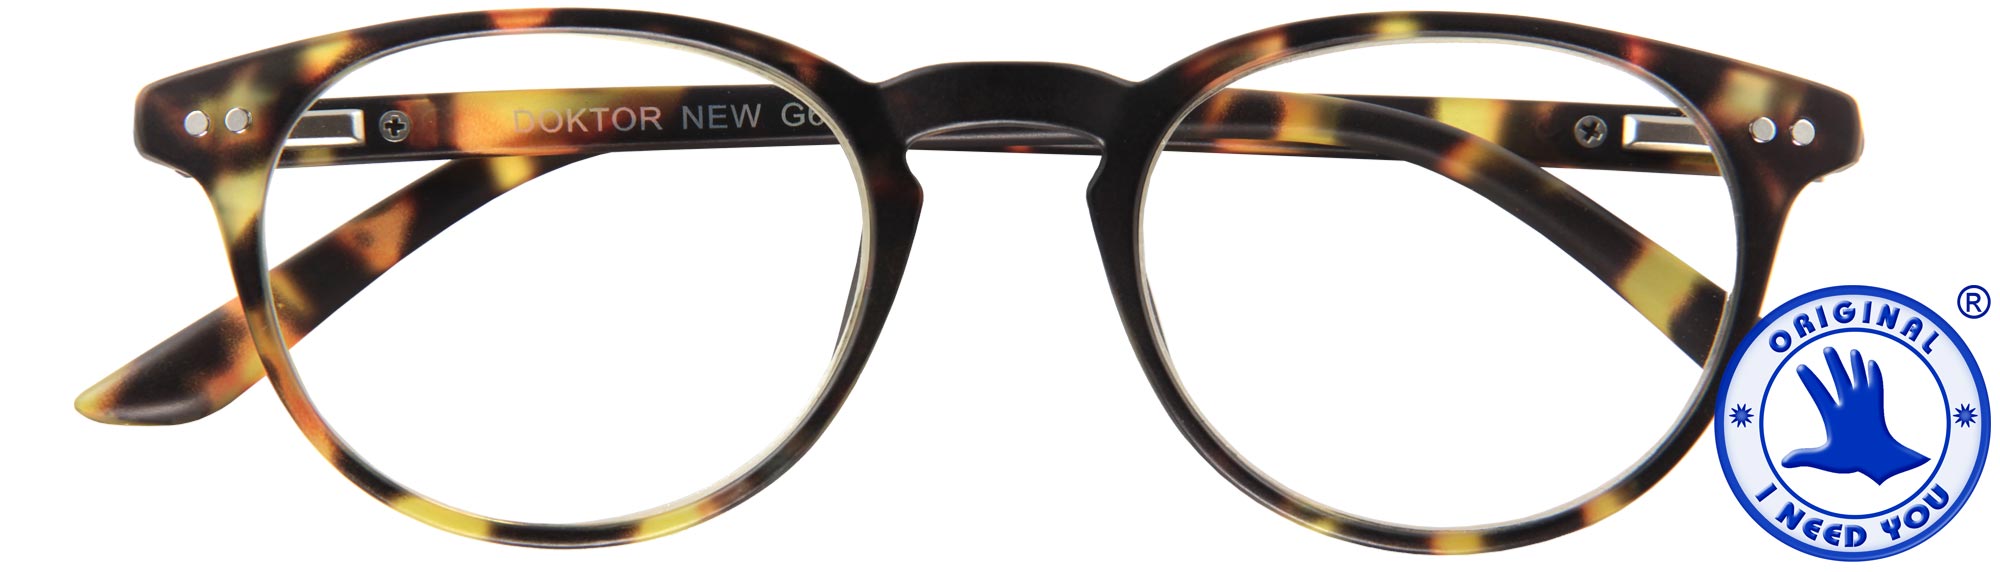 Funky reading glasses for men and women from I Need You